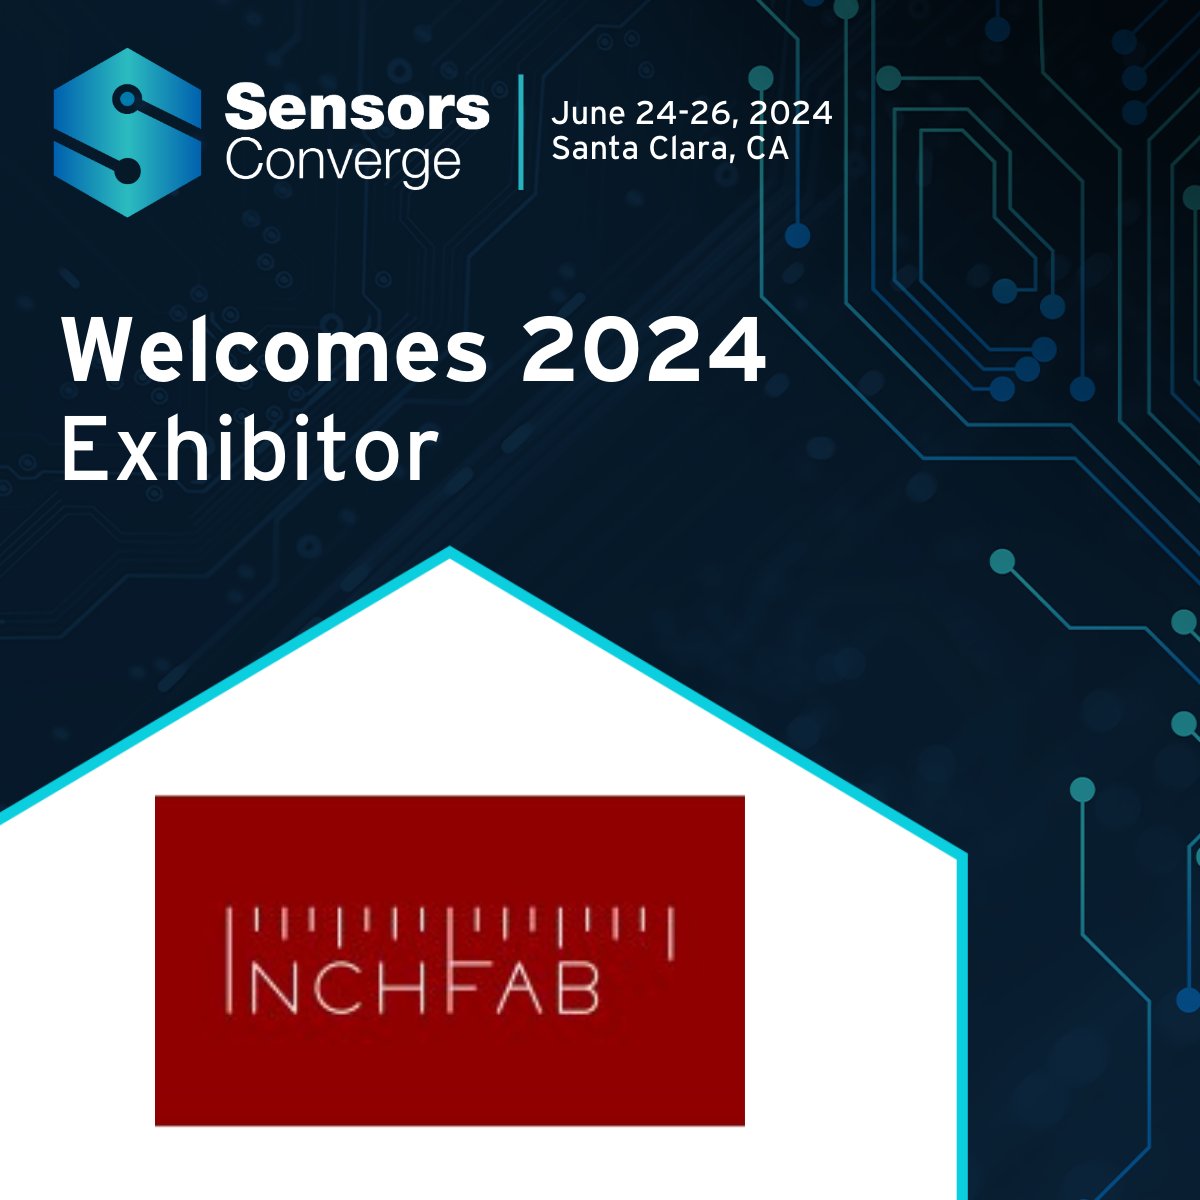 Welcome InchFab to #SensorsConverge! InchFab offers a low cost and fast cycle time microfab service solution designed for today's microfabricated technologies. Learn more: inchfab.com Register and join us: June 24-26 in Santa Clara sensorsconverge.com/sensorsconverg… #sensors